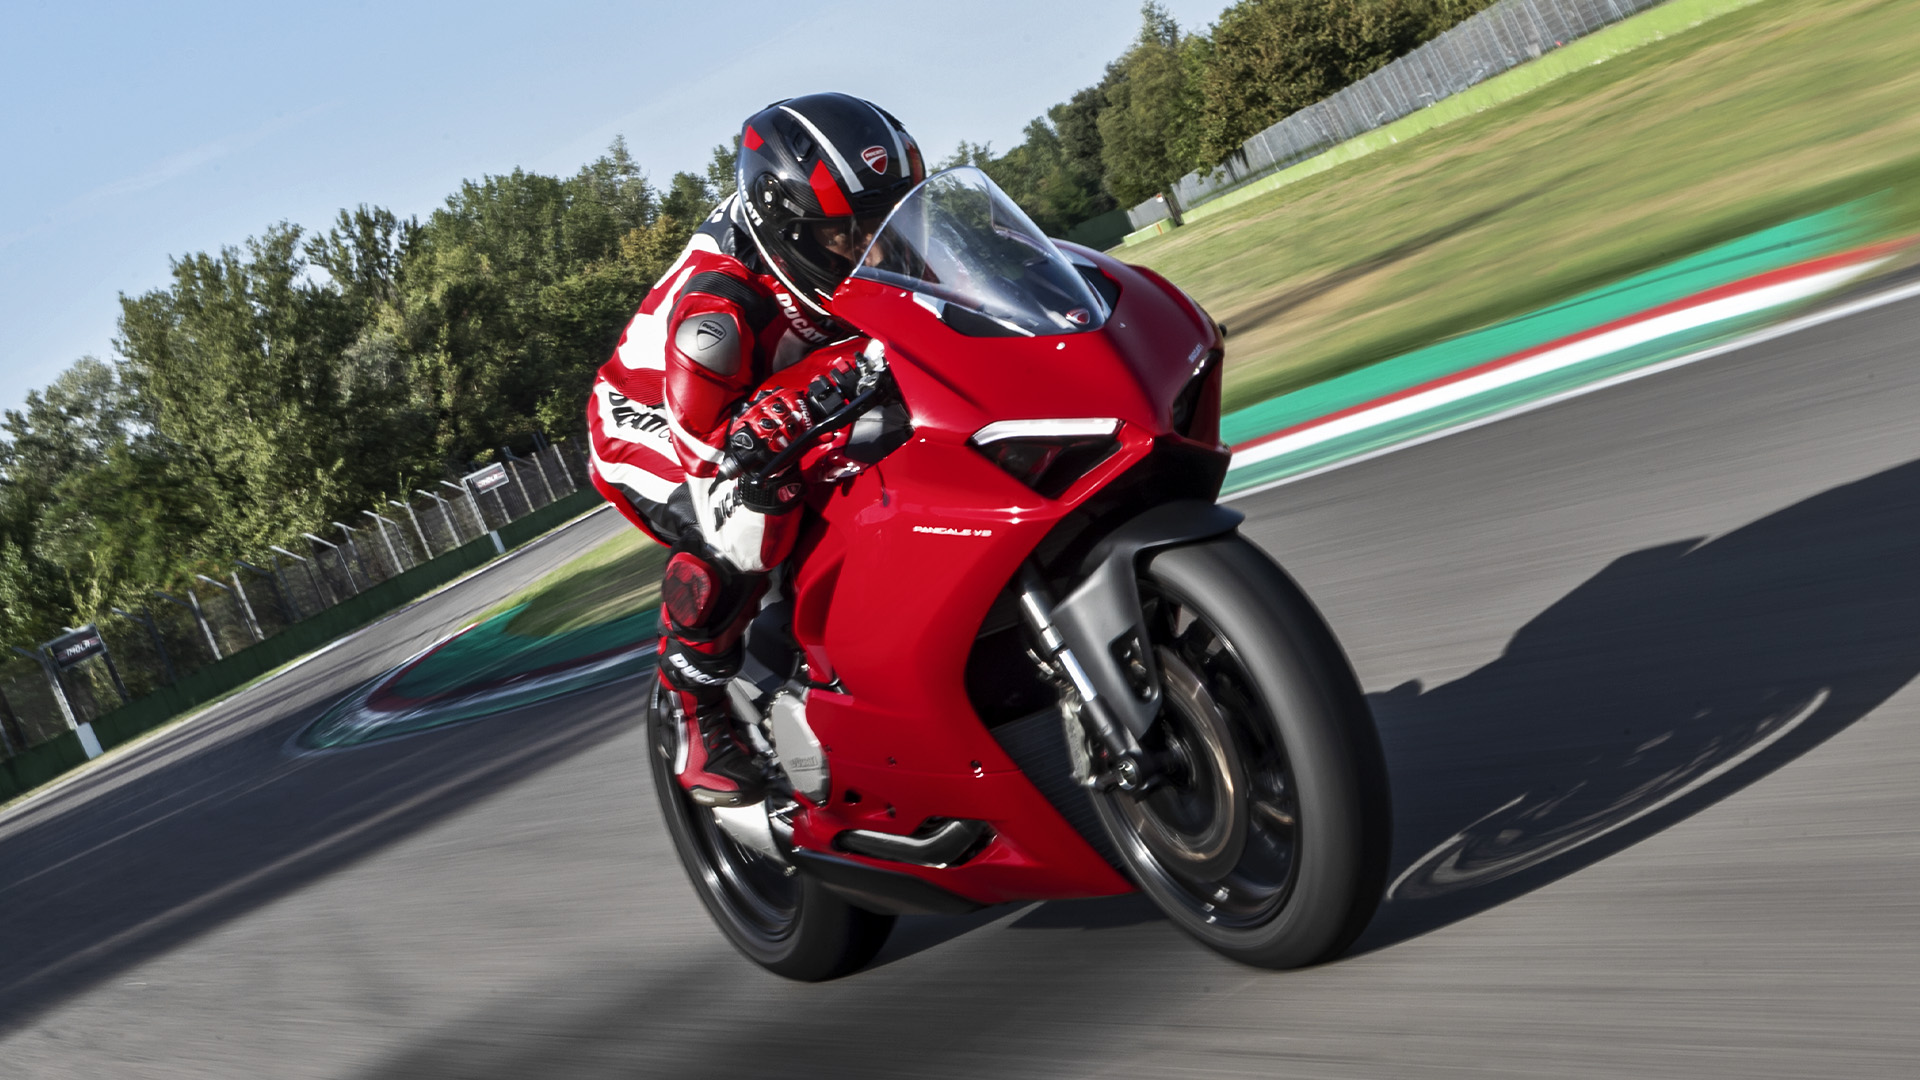 Panigale-V2-overview-gallery-02-1920x1080